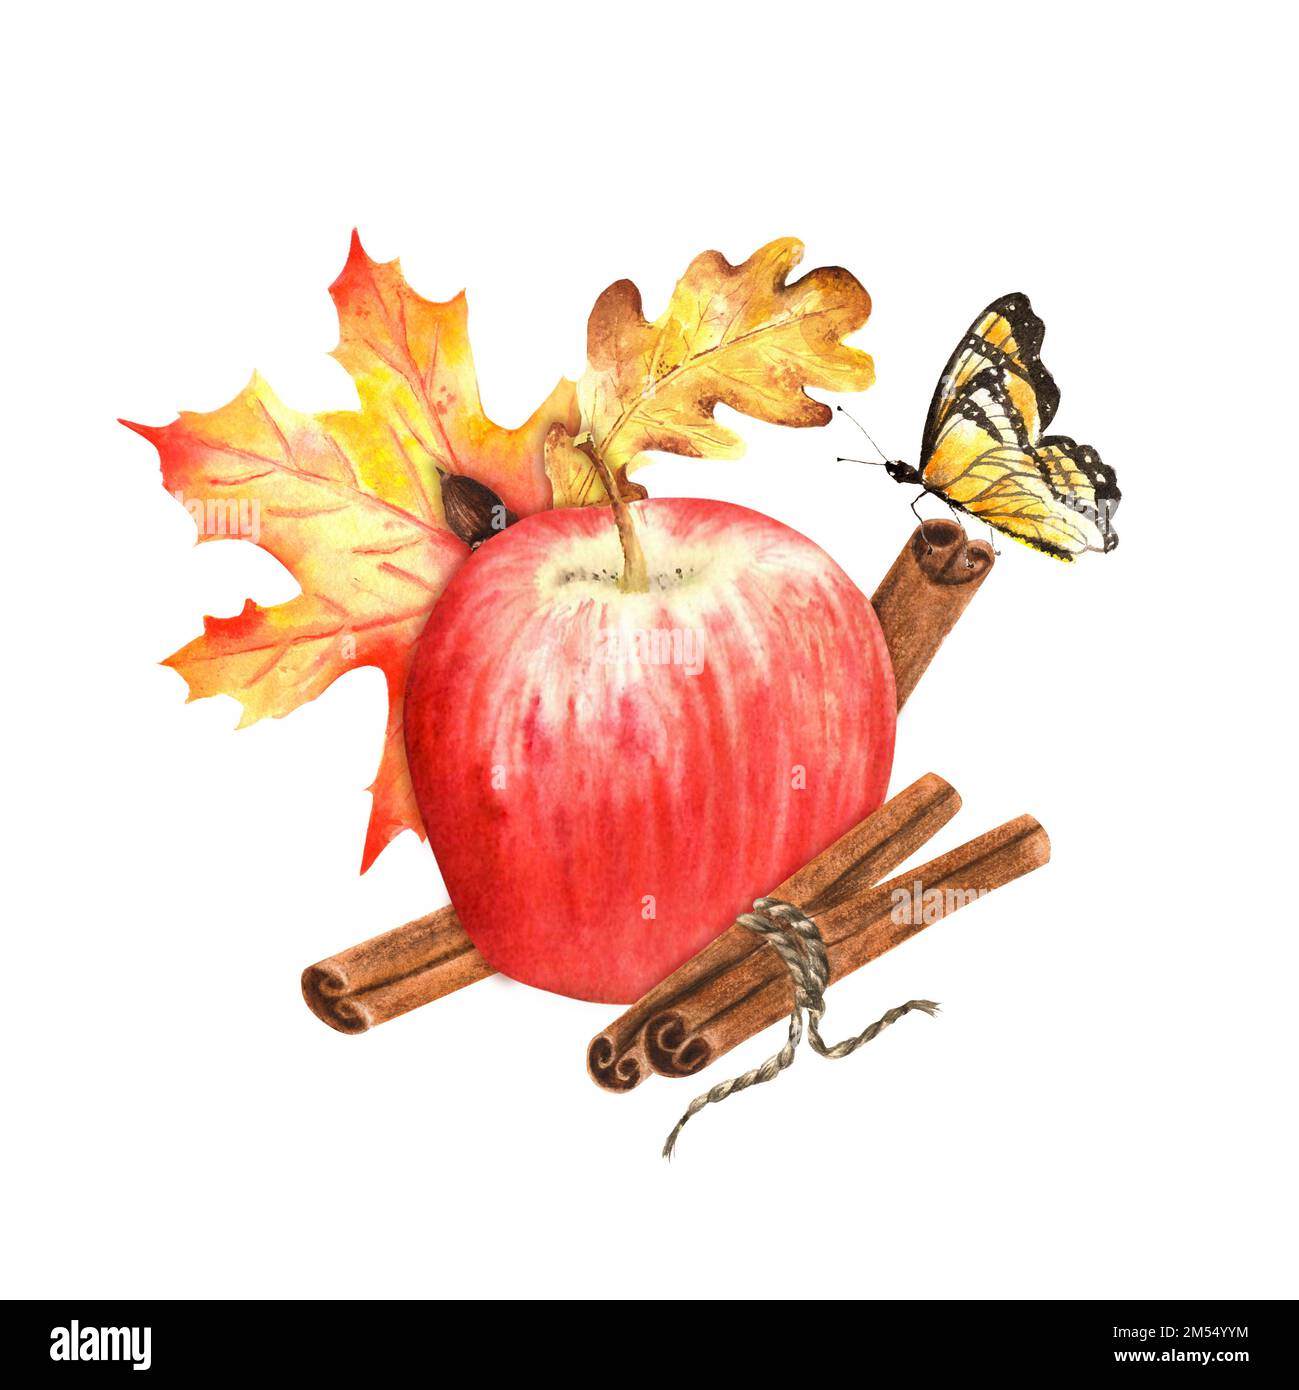 Hand-drawn watercolor composition with apple, colorful leaves, cinnamon sticks and a butterfly. A small illustration for printing design. Stock Photo